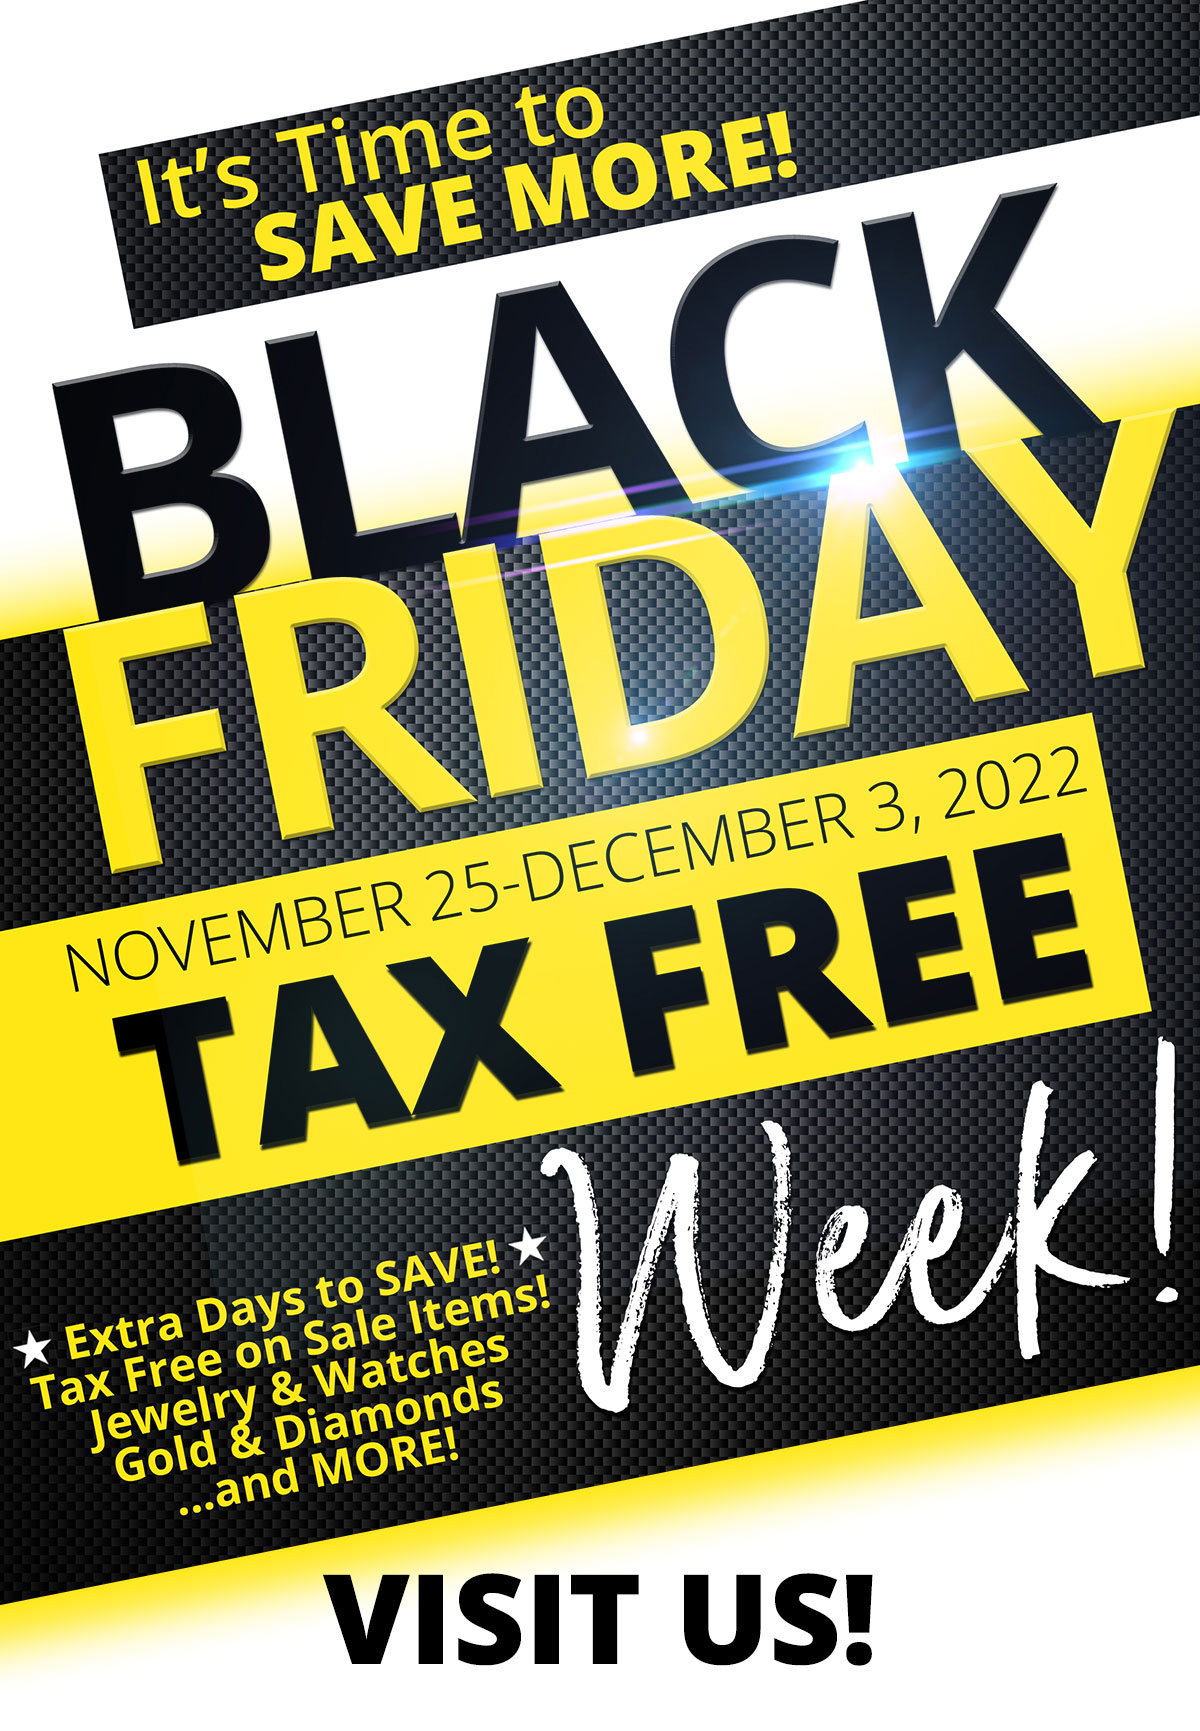 Black Friday Tax Free Week November 25 - December 3, 2022 It's Time to Save More